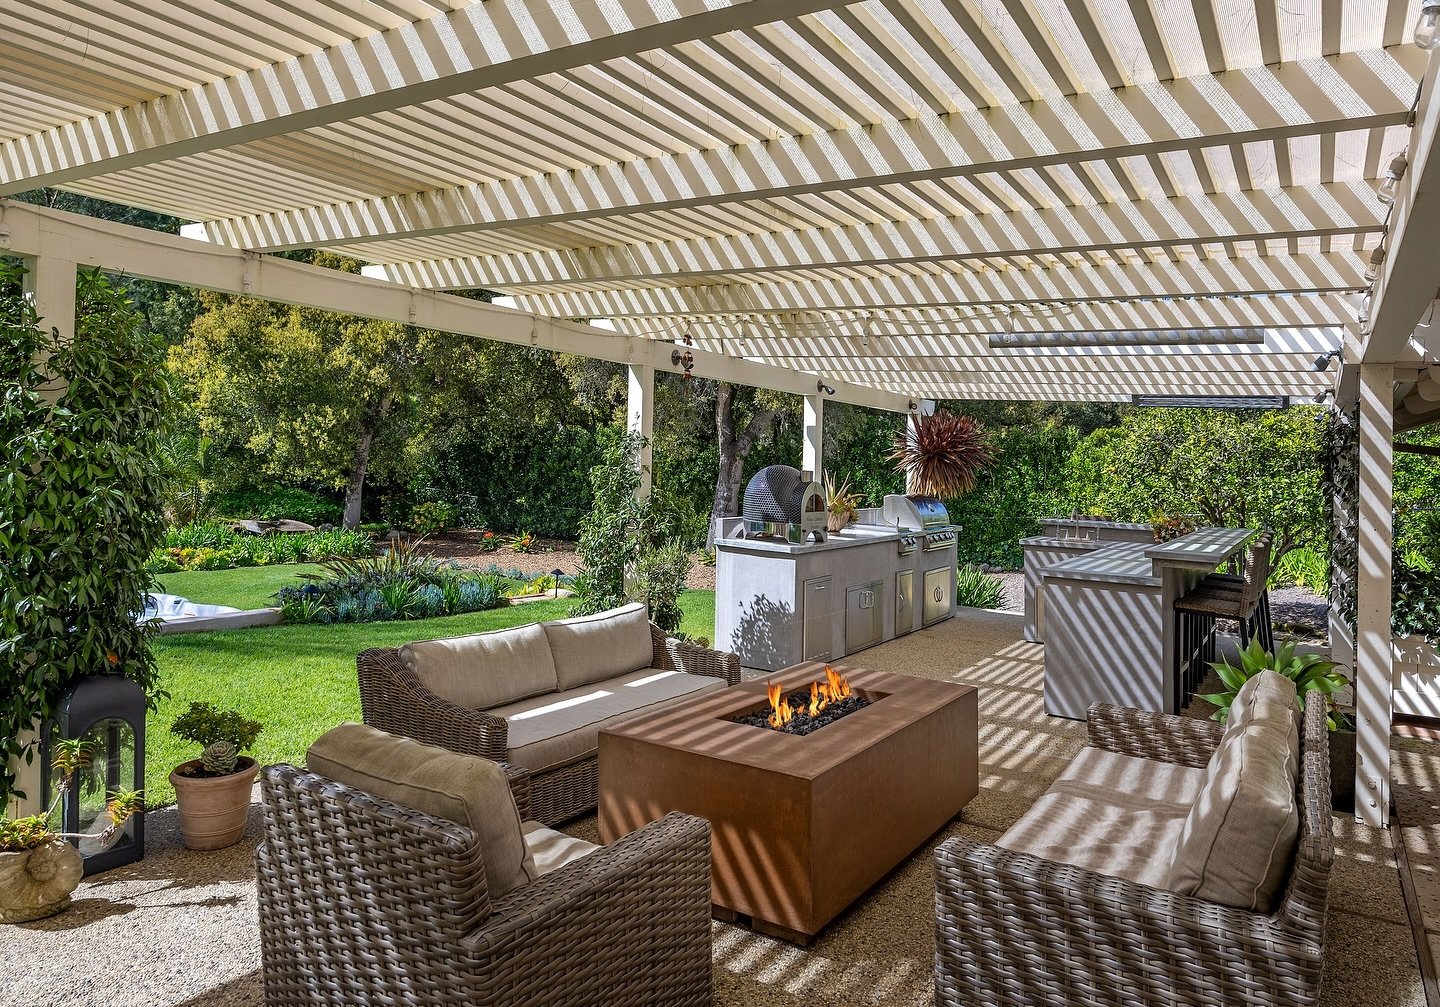 When your backyard is part of your everyday living space! This is such a great space for entertaining, cooking, or just relaxing. 
.
.
📷: @jimbartschphotographer 
Landscape Architect: Robert Richards

#cornerstonelandscapes #cornerstoneSB #backyeard